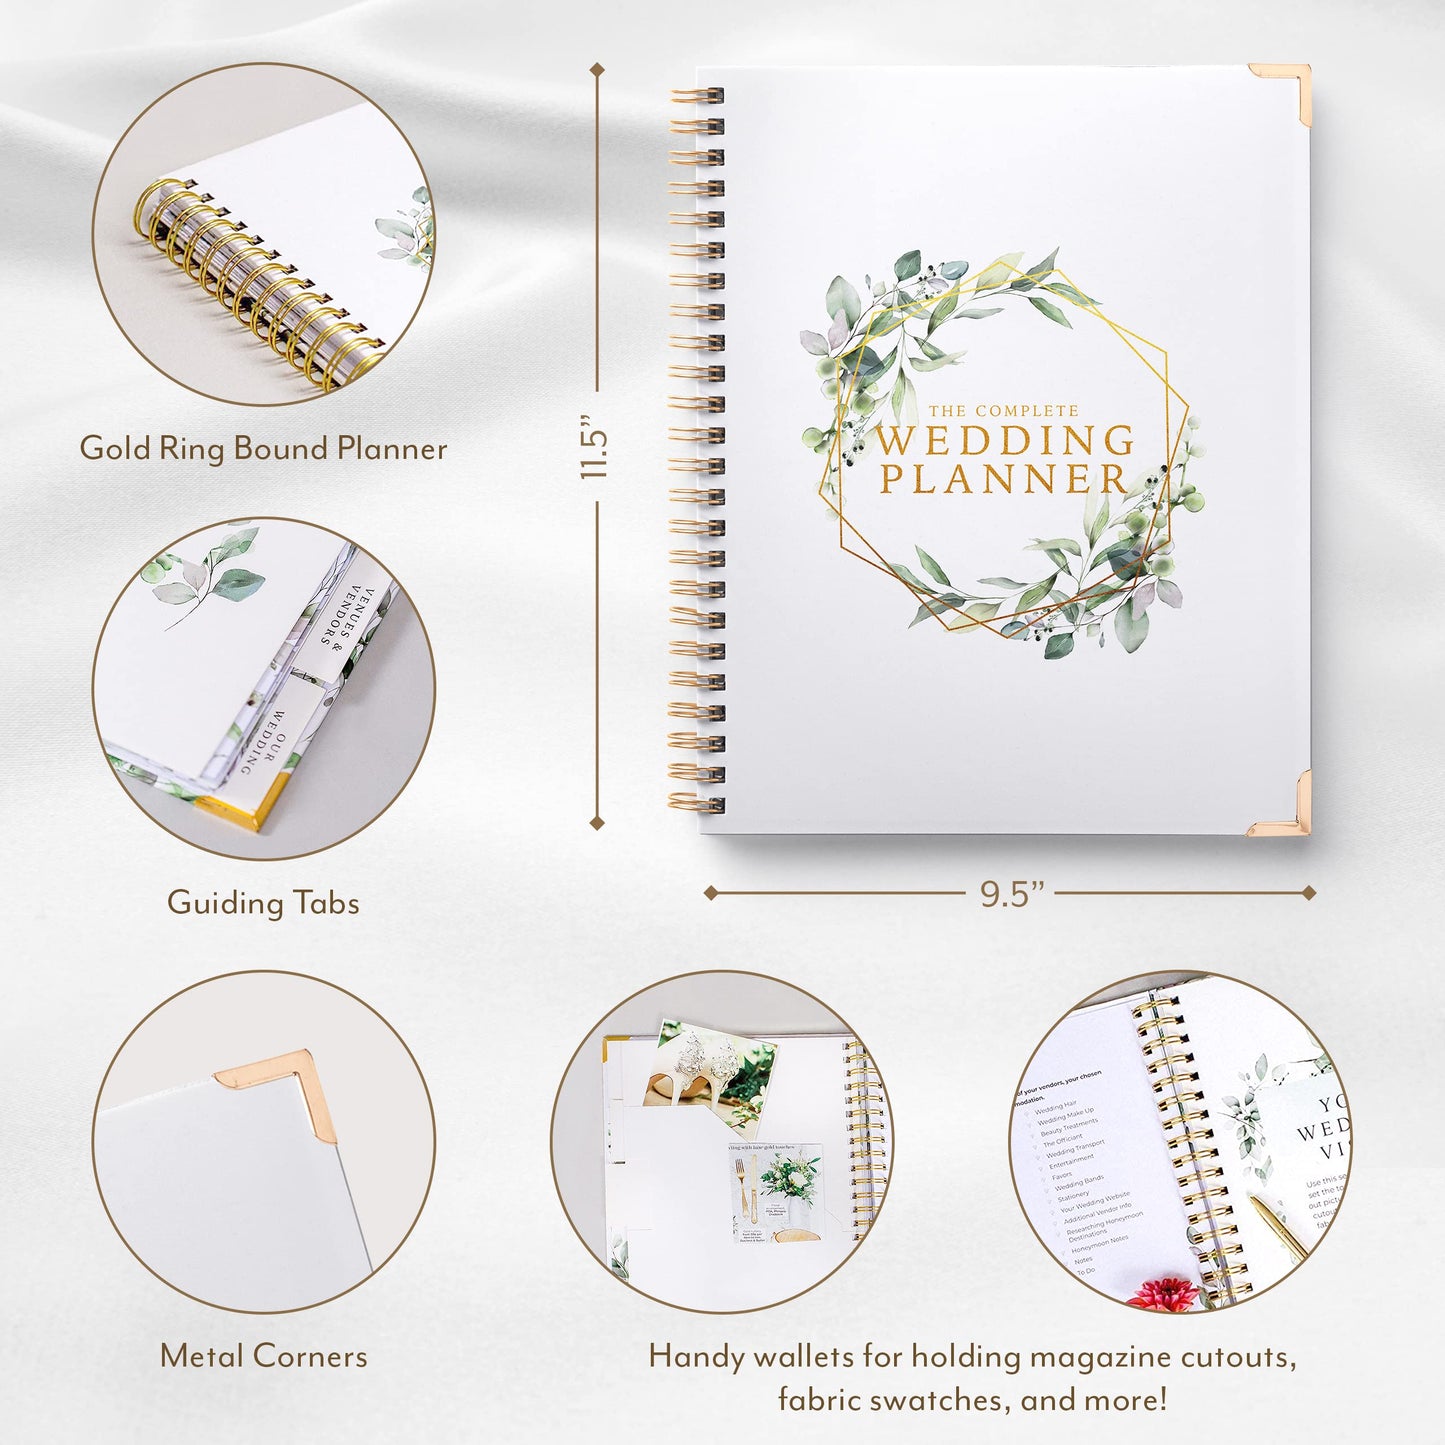 Your Perfect Day Wedding Planner for Bride - Planning Book and Organizer, Bridal Binder with Countdown Calendar